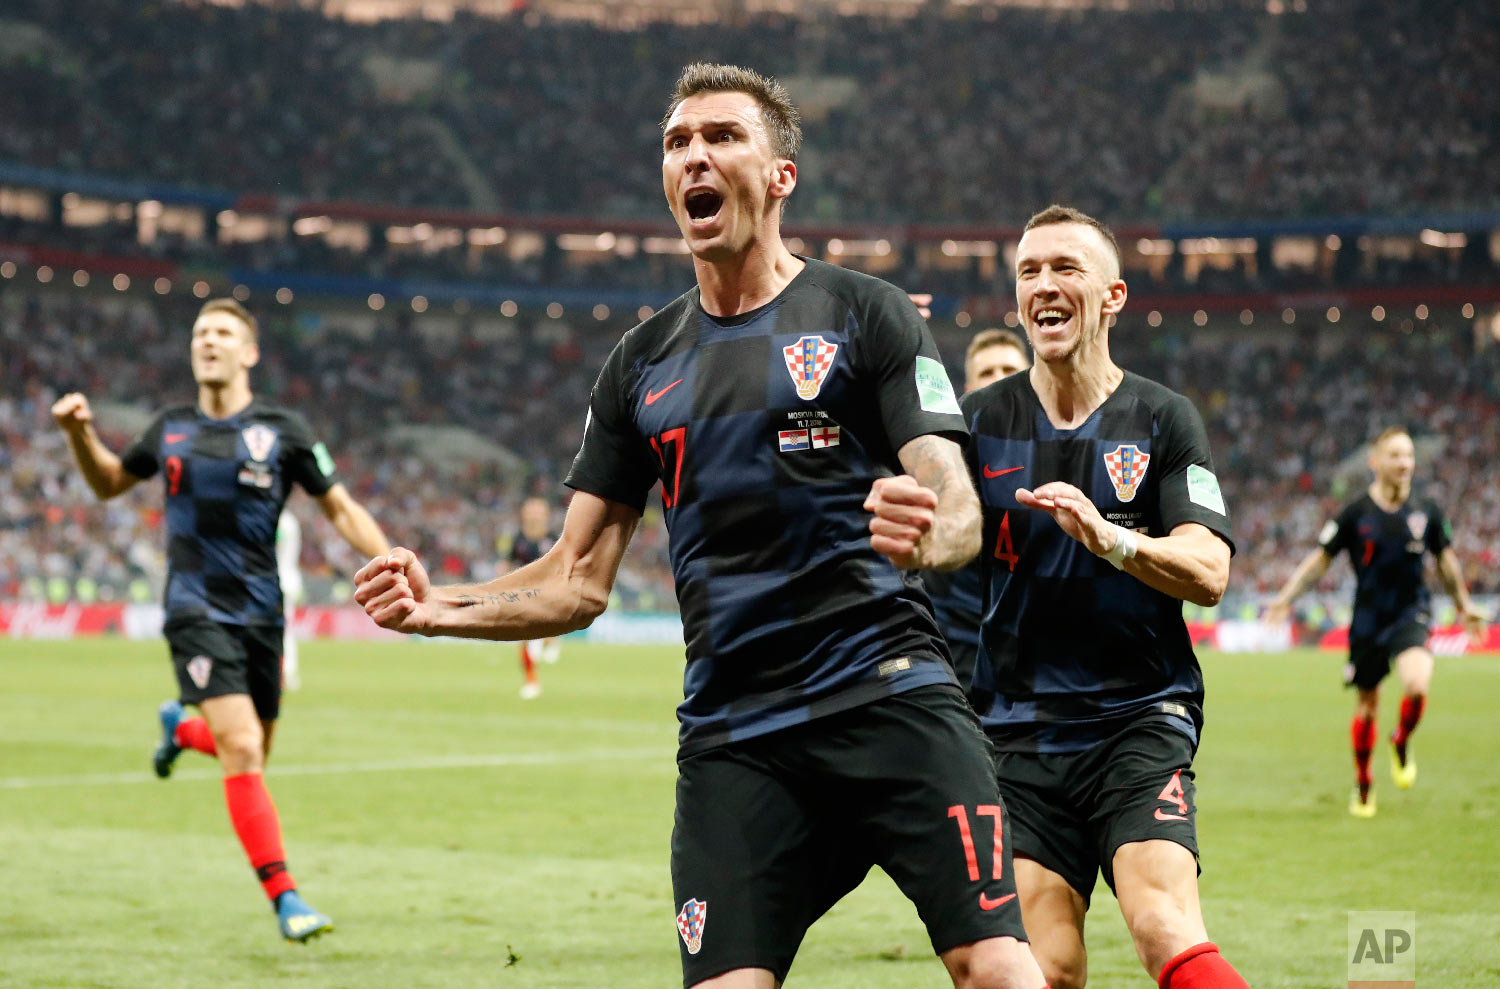  Croatia's Mario Mandzukic celebrates after scoring his side's second goal during the semifinal match between Croatia and England at the 2018 soccer World Cup in the Luzhniki Stadium in Moscow, Russia, Wednesday, July 11, 2018. (AP Photo/Frank Augste